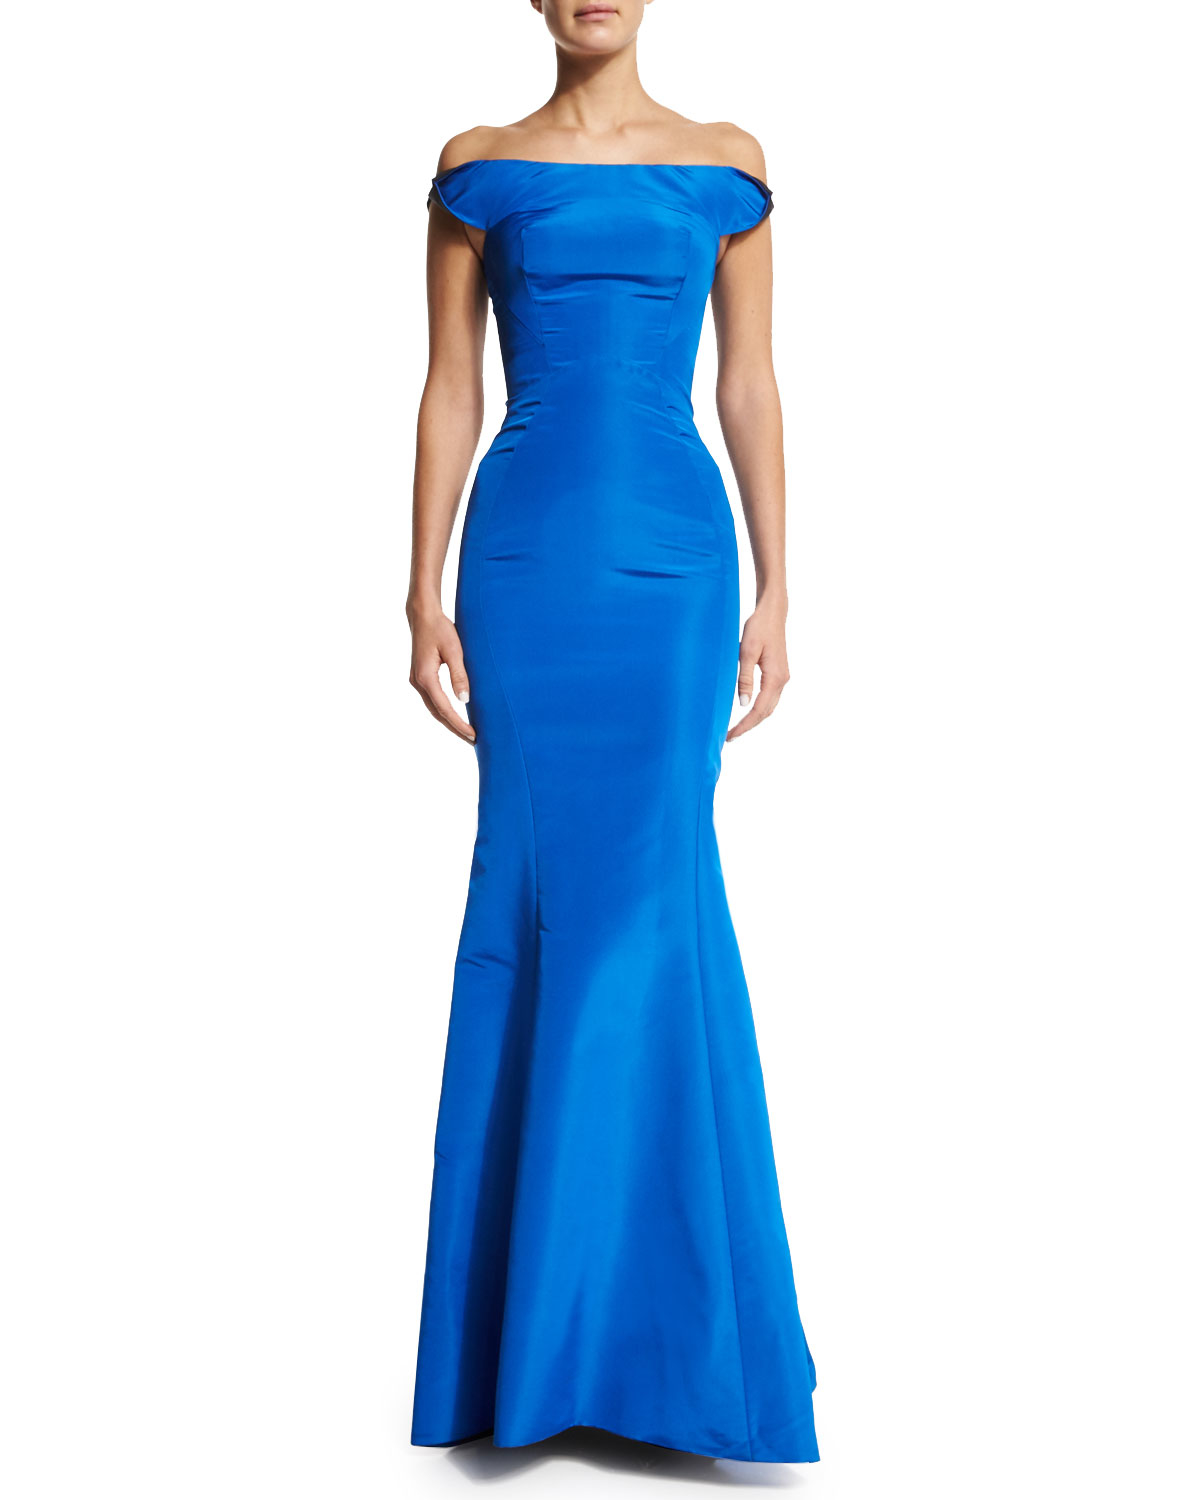 Zac posen Off-the-shoulder Two-tone Gown in Blue | Lyst